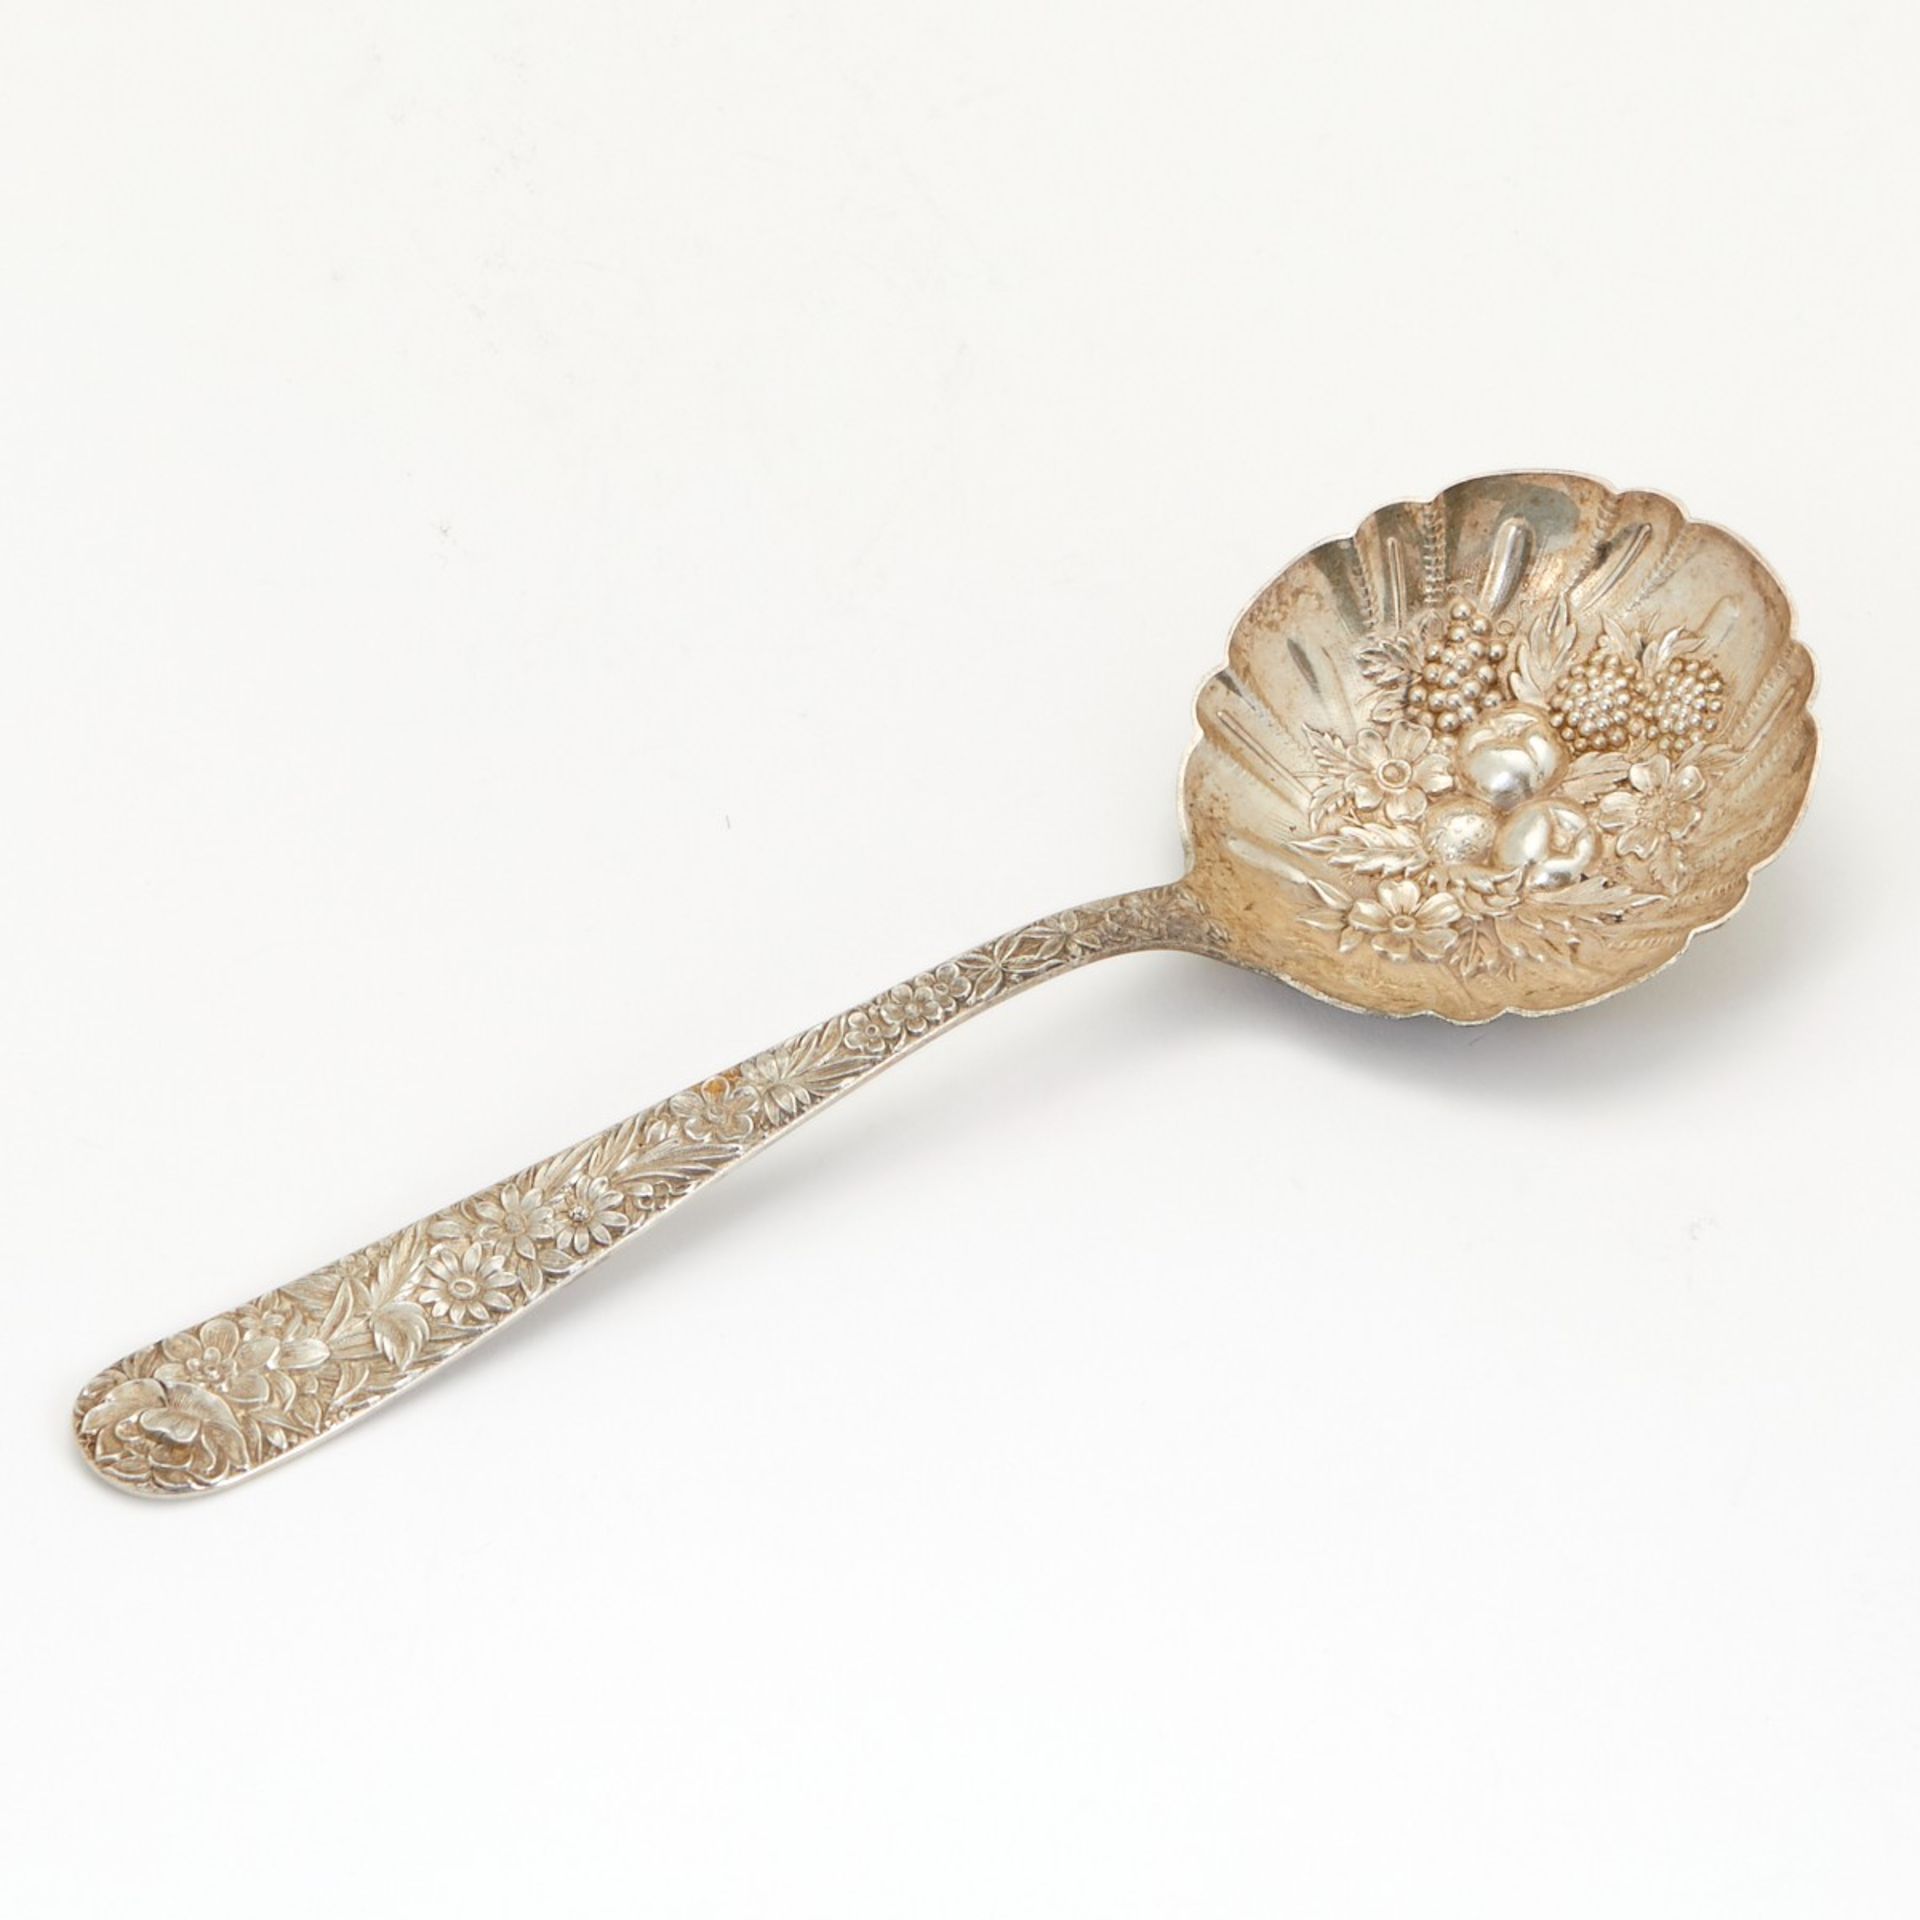 S. Kirk and Sons Repousse Sterling Silver Nut Dish and Spoon - Image 5 of 9